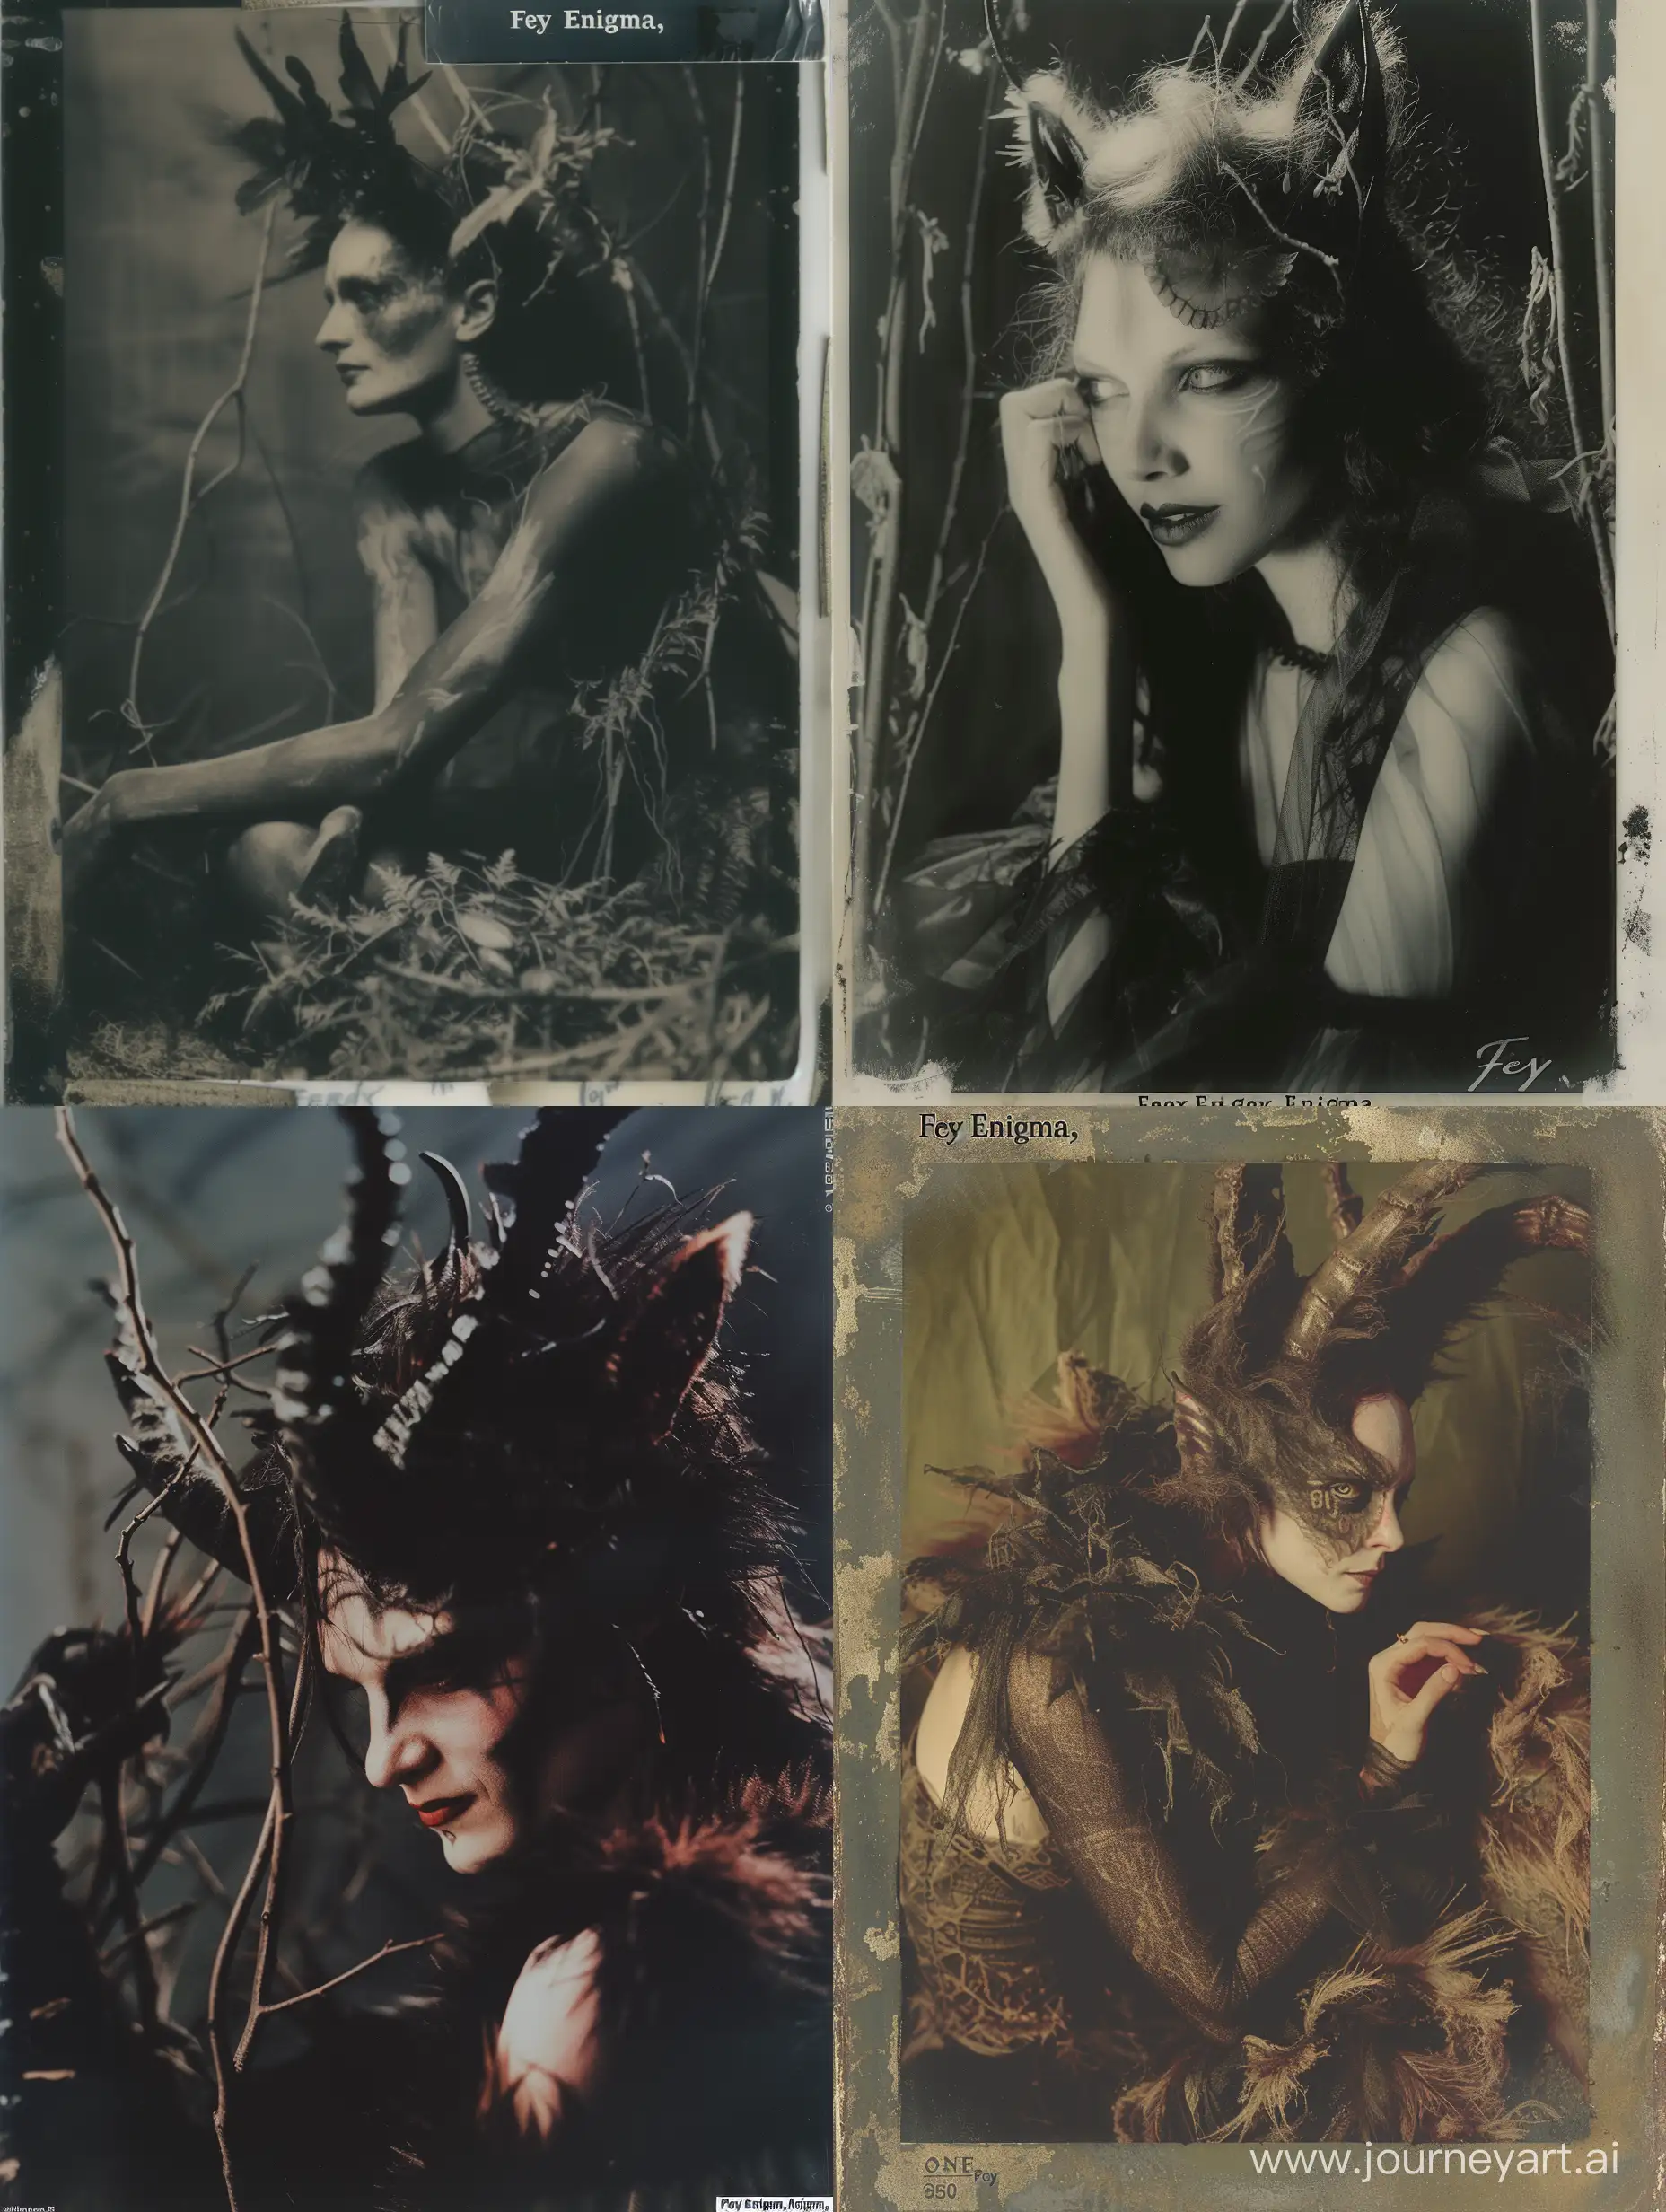 Fey-Enigma-A-Hauntingly-Beautiful-Creature-in-a-Dark-Aesthetic-Setting